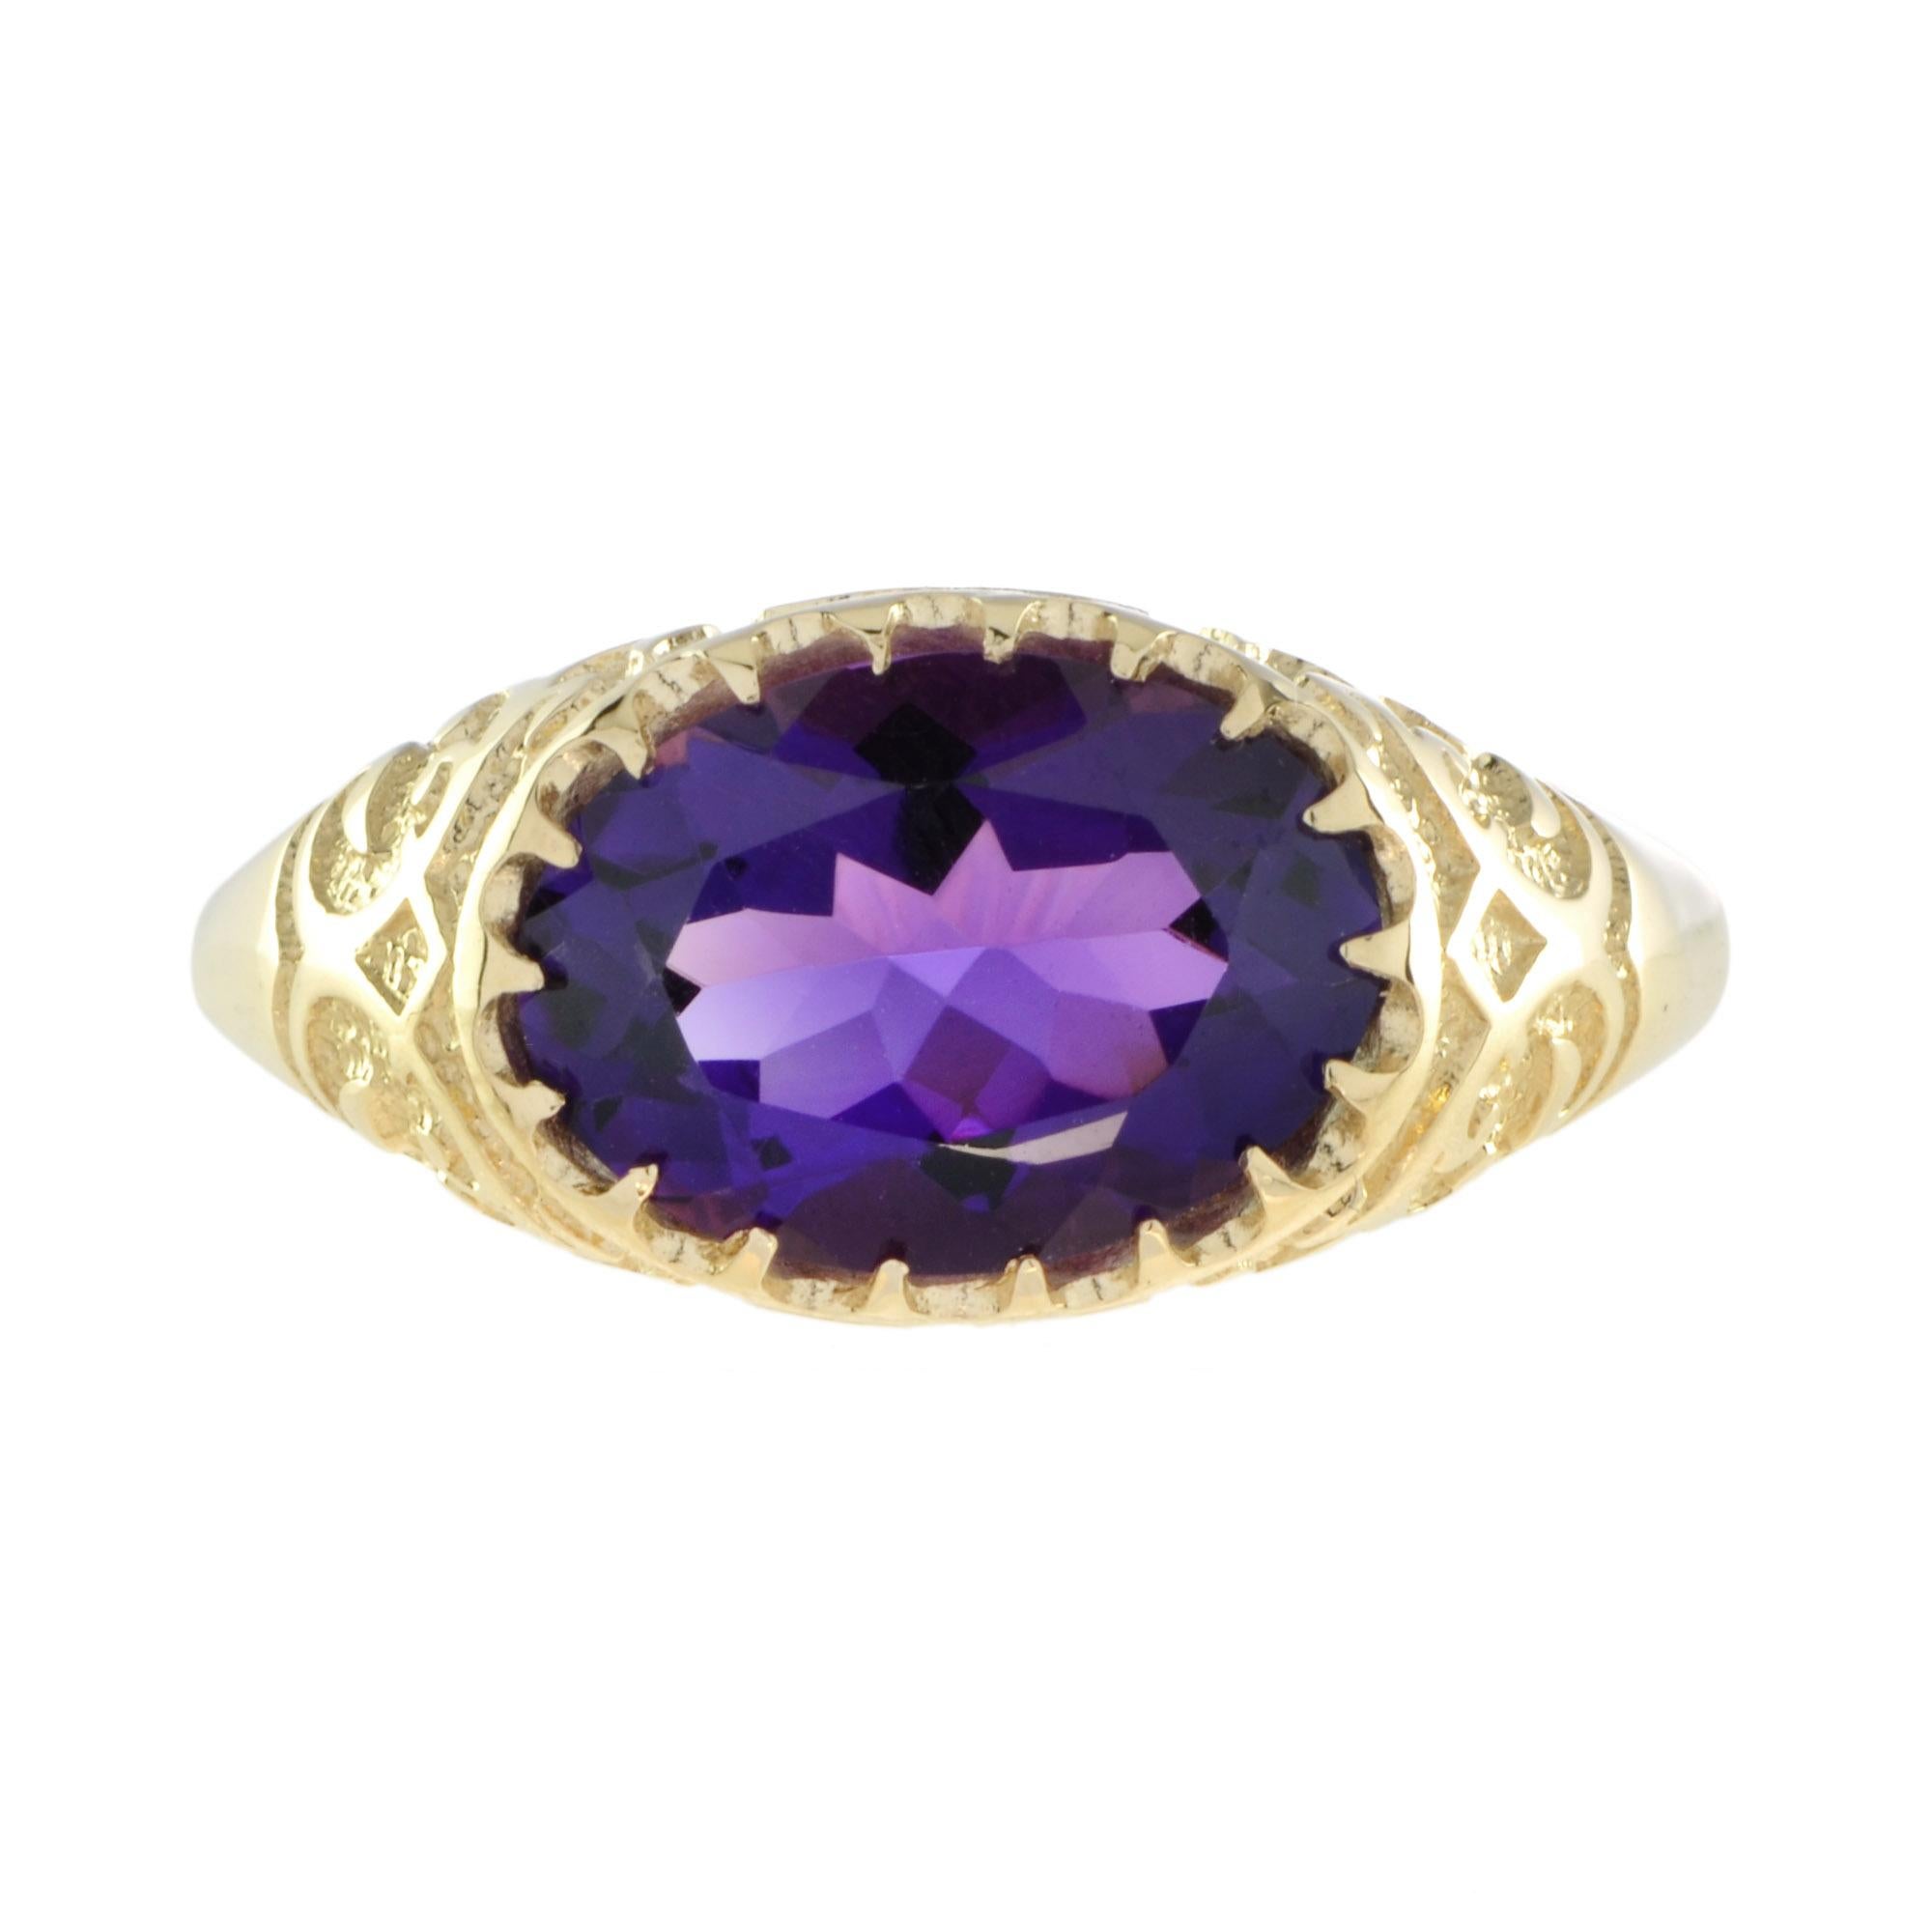 A unisex delicate design yet suitable for everyday wear and powerful color join forces. A mesmerizing oval cut amethyst with purple hues in a finely cut and polished gemstone. With a generous size of 7.50 carats, it rests proudly in a 9k gold